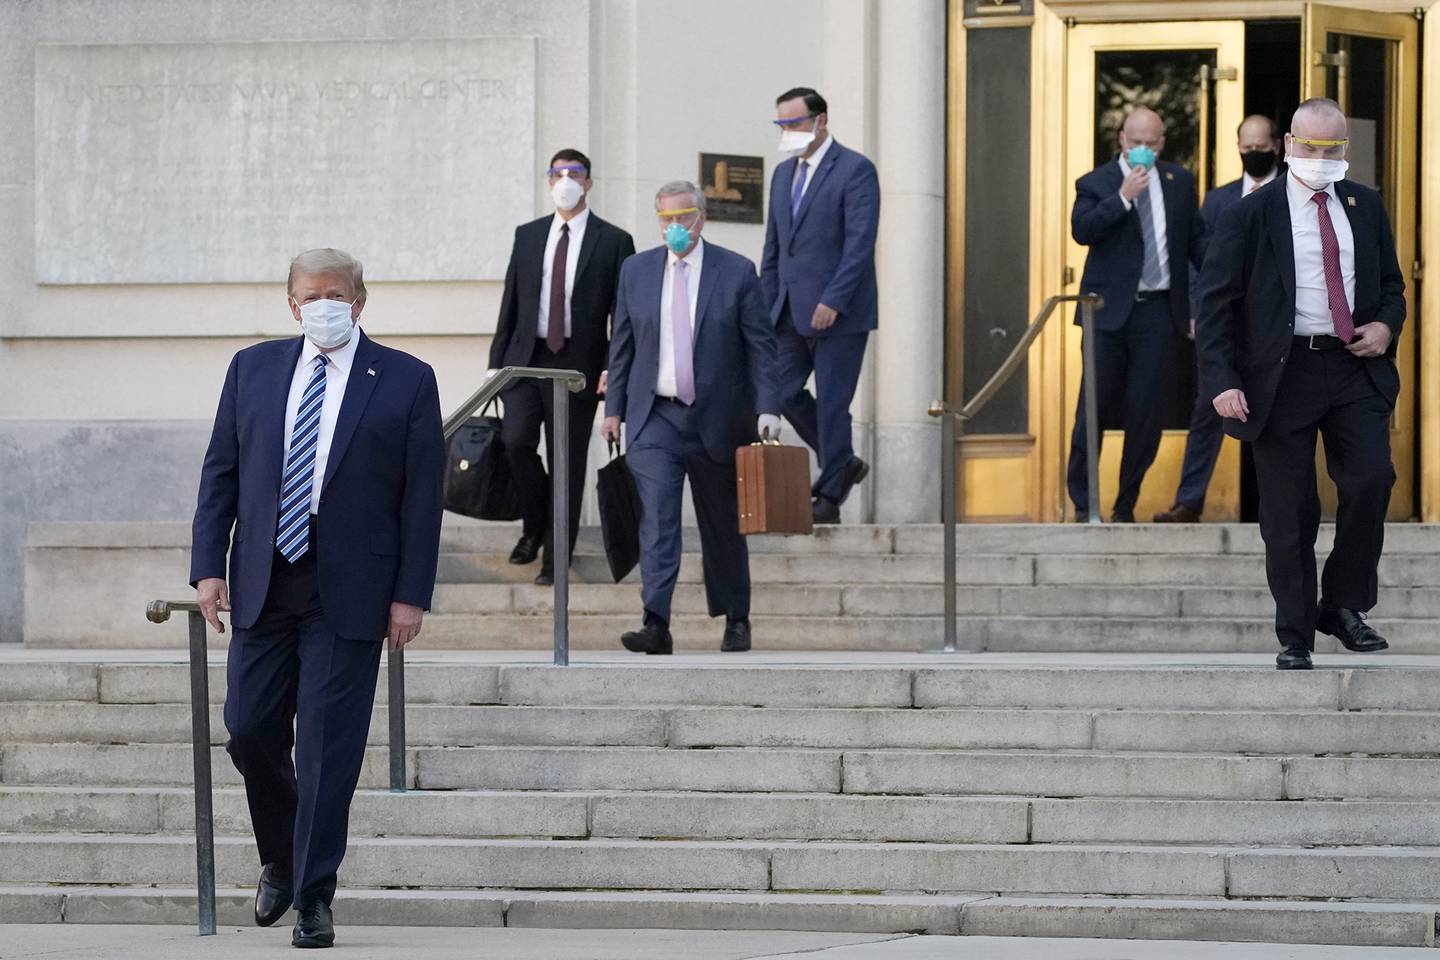 President Donald Trump, left, walks out of Walter Reed National Military Medical Center to return to the White House after receiving treatments for COVID-19, Monday, Oct. 5, 2020, in Bethesda, Md.